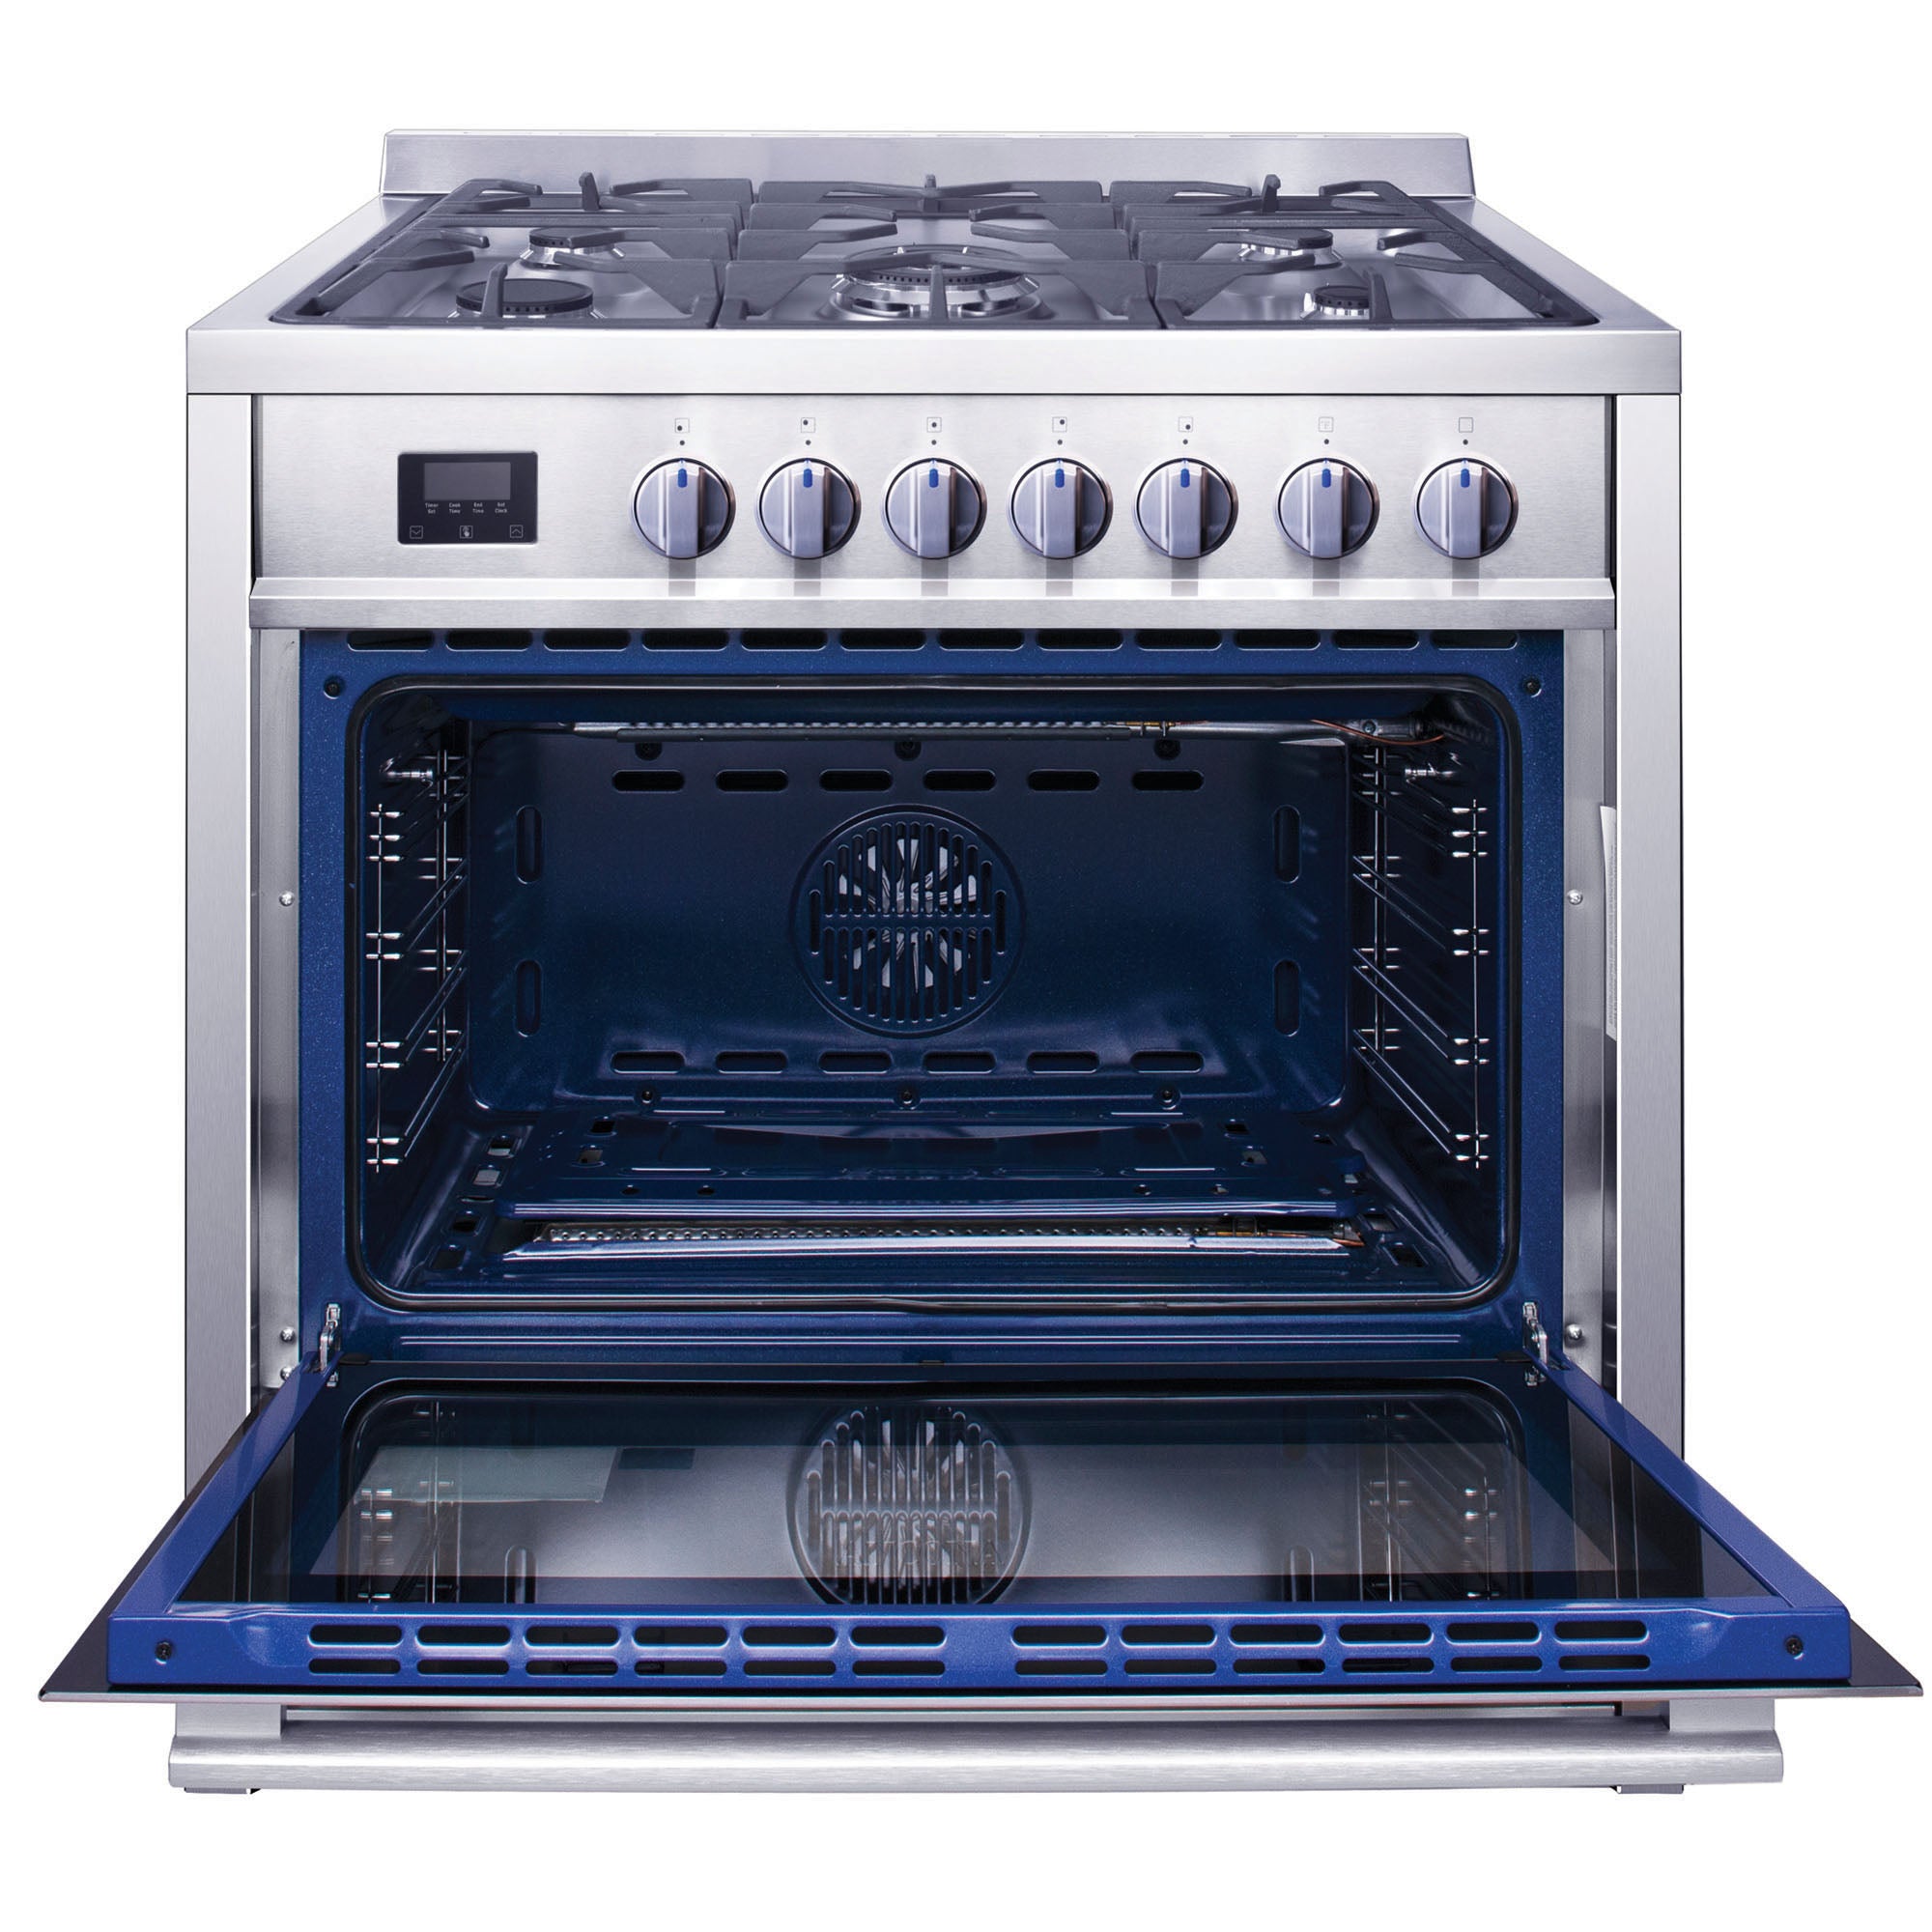 Ancona 36” 3.8 cu. ft. Gas Range with 5 Burners and Convection Oven in Stainless Steel